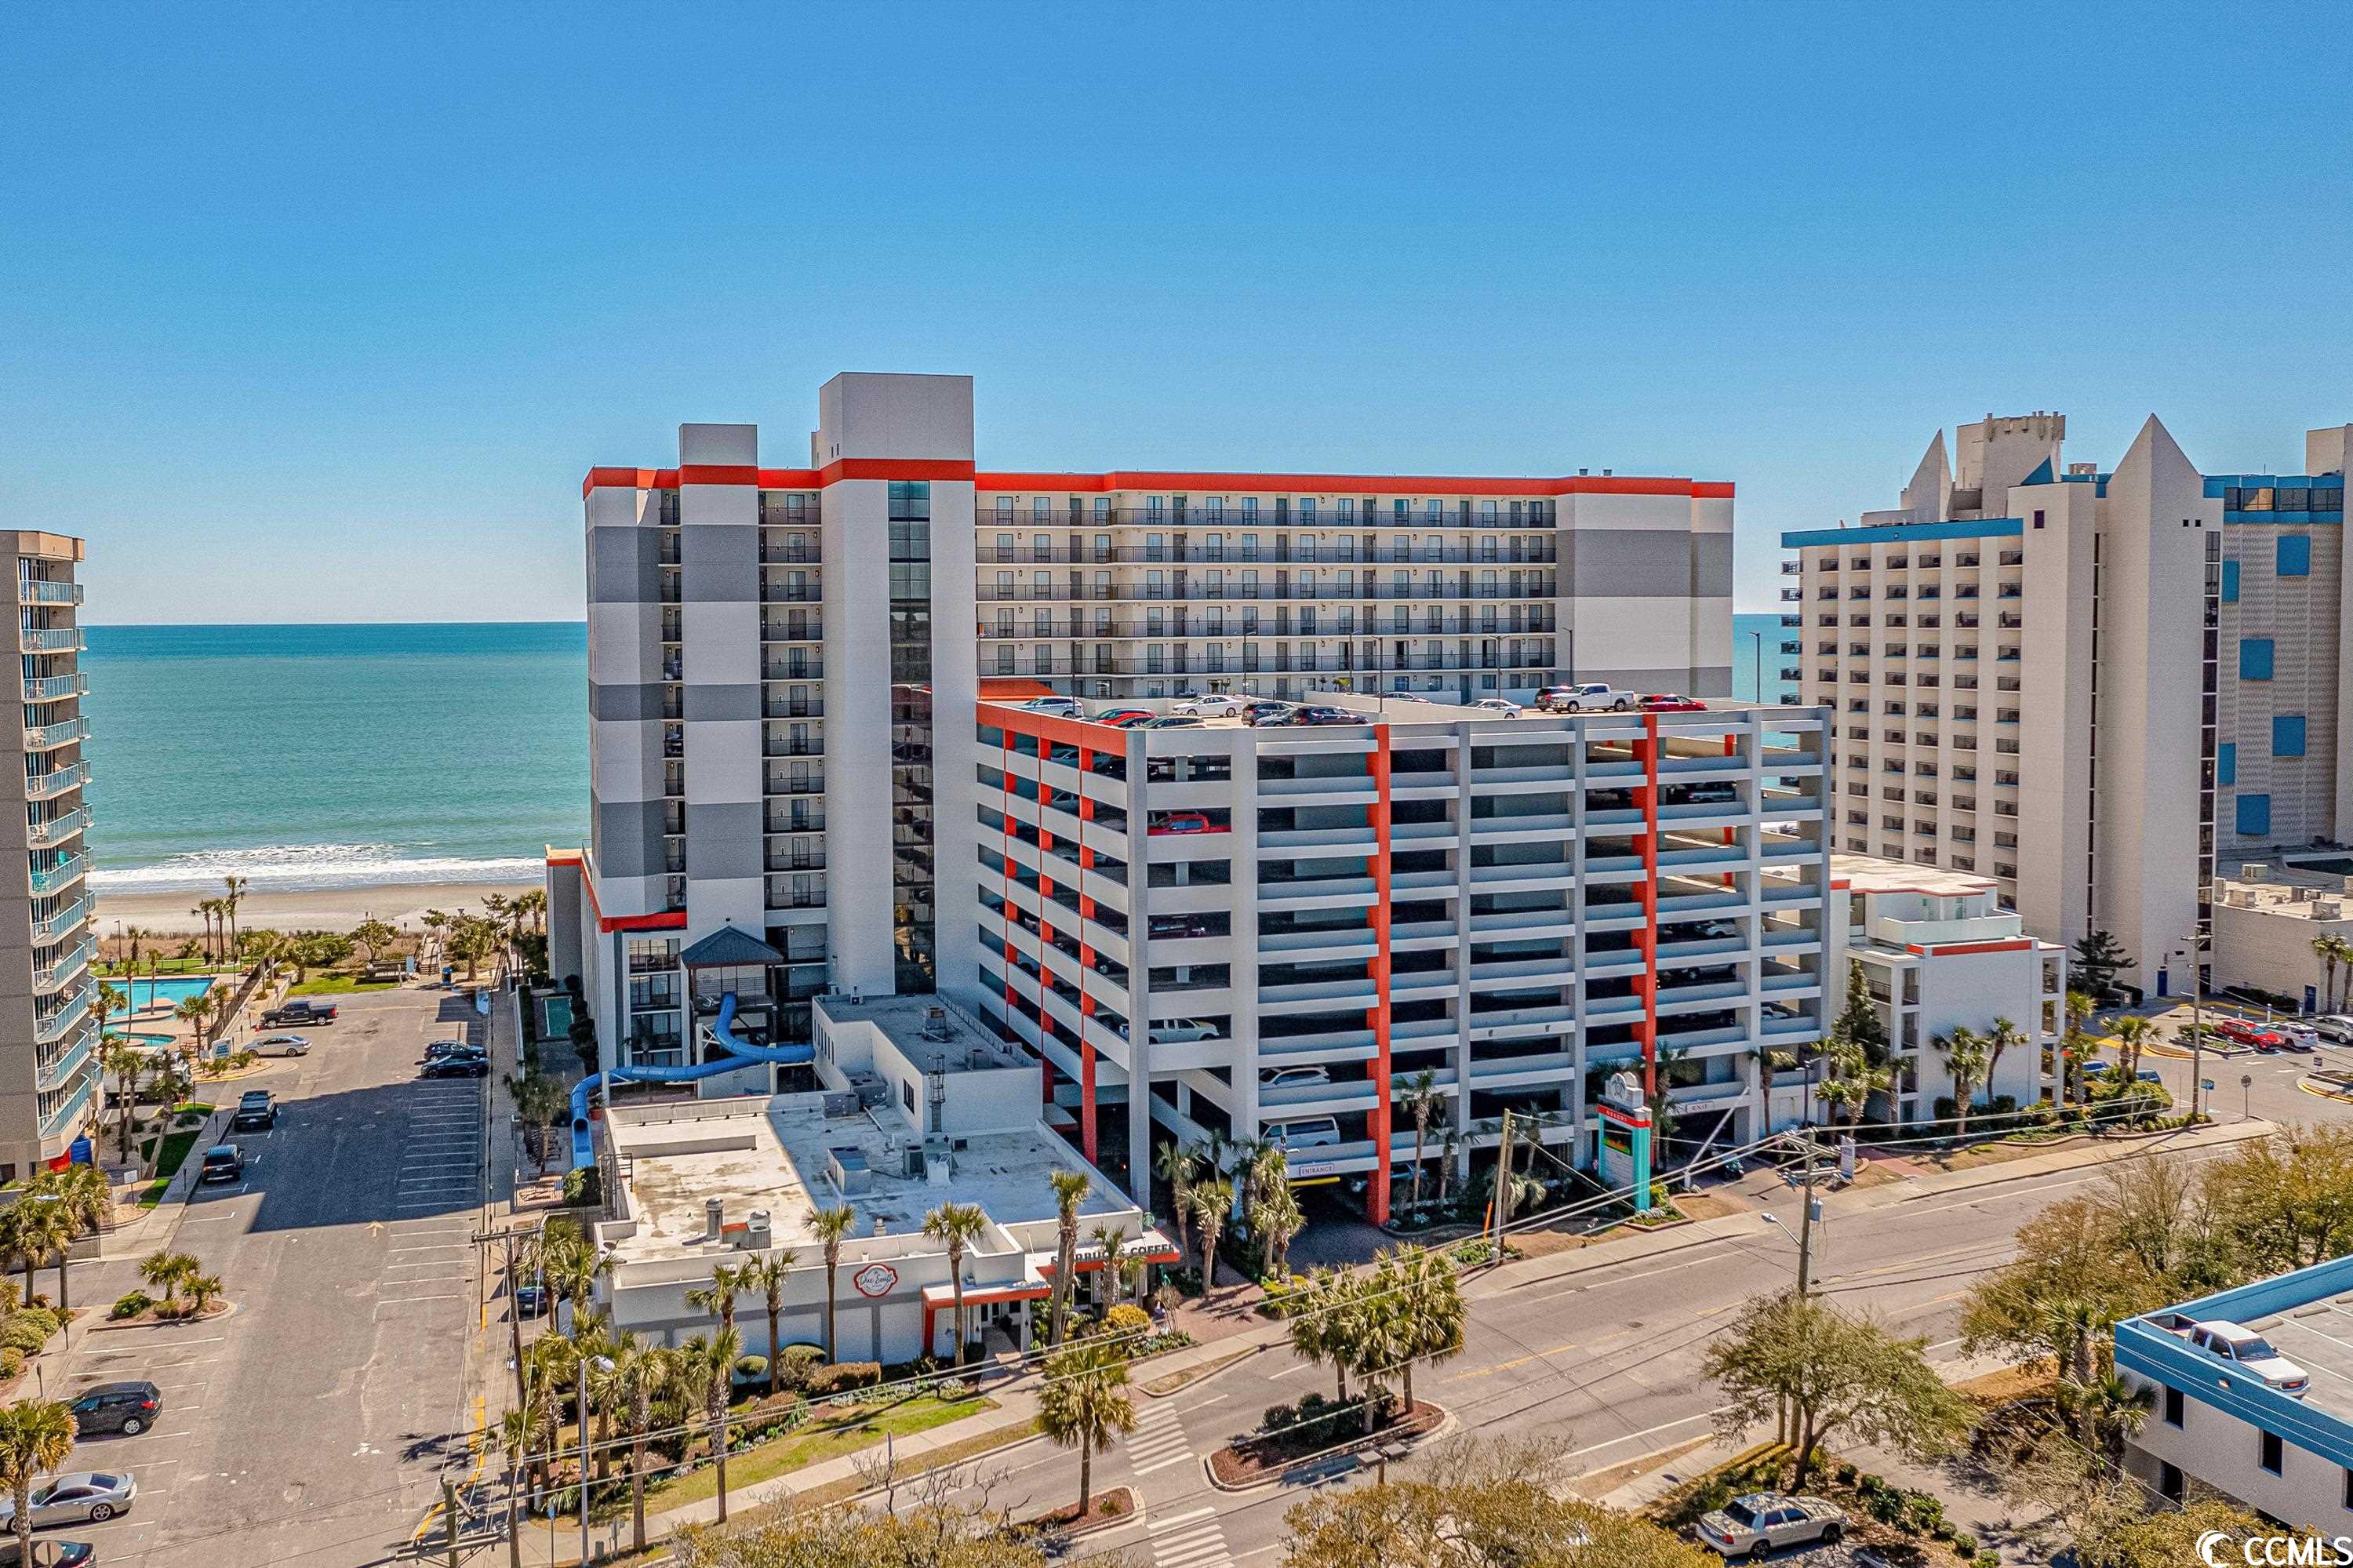 ***seller willing to pay off bulk upfit with acceptable offer*** welcome to your beach oasis! just bring your suitcase and don't worry about the rest. this completely updated, fully furnished 1-bedroom, 1-bathroom unit combines price, location, and convenience...what more could you want? park your car right outside your door in the covered parking garage, and enter your condo without ever having to step foot in the lobby, elevator or stairs. cleaning up sand is a breeze with lvt flooring throughout except for the bathroom, which features tile. the tile is carried up the wall from the tub/shower combo. both the bathroom and kitchen feature granite countertops, and the kitchen is well-equipped with matching black appliances and a stylish blue backsplash. speaking of stylish, the large living room is accented by a wall of white shiplap, and walks right out to your own private balcony where you can take in ocean views and breezes! this condo may be a one bedroom, but it comfortably sleeps 8 with two queen beds, a pullout sofa and a murphy bed! everyone will want to visit with all that grande cayman resort has to offer: waterslides, indoor and outdoor pools, water park,hot tubs, kiddie pools, lazy river, putt putt, in house restaurants and a starbucks just off the lobby! with all of these amenities, it makes sense that this would be a great income producing property. don't want to rent? pay only one bill as your hoa dues cover it all!